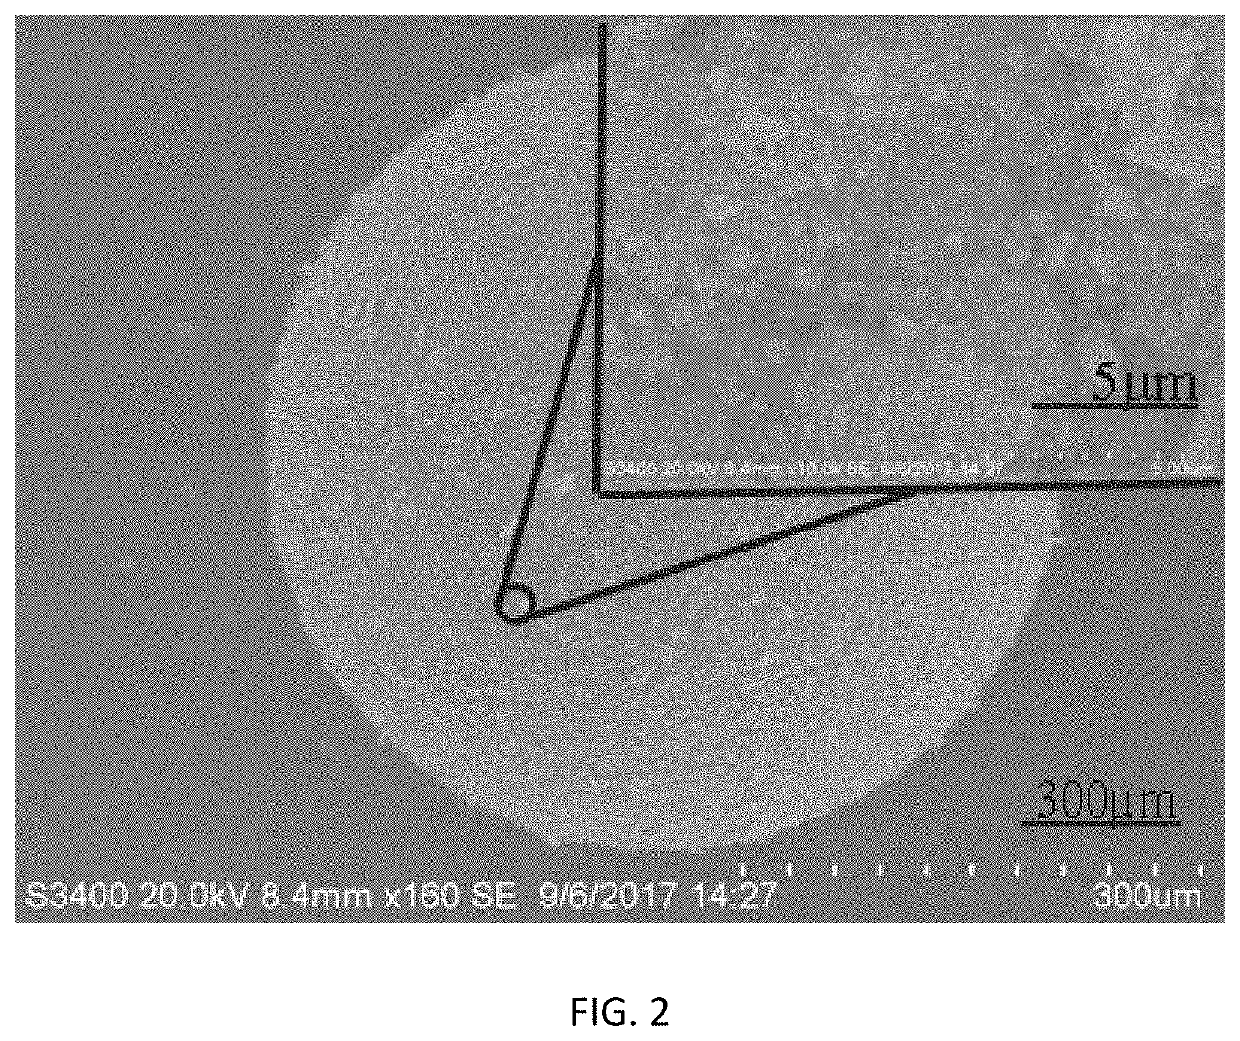 Magnetic strong base anion exchange resin with high mechanical strength, and preparation method thereof